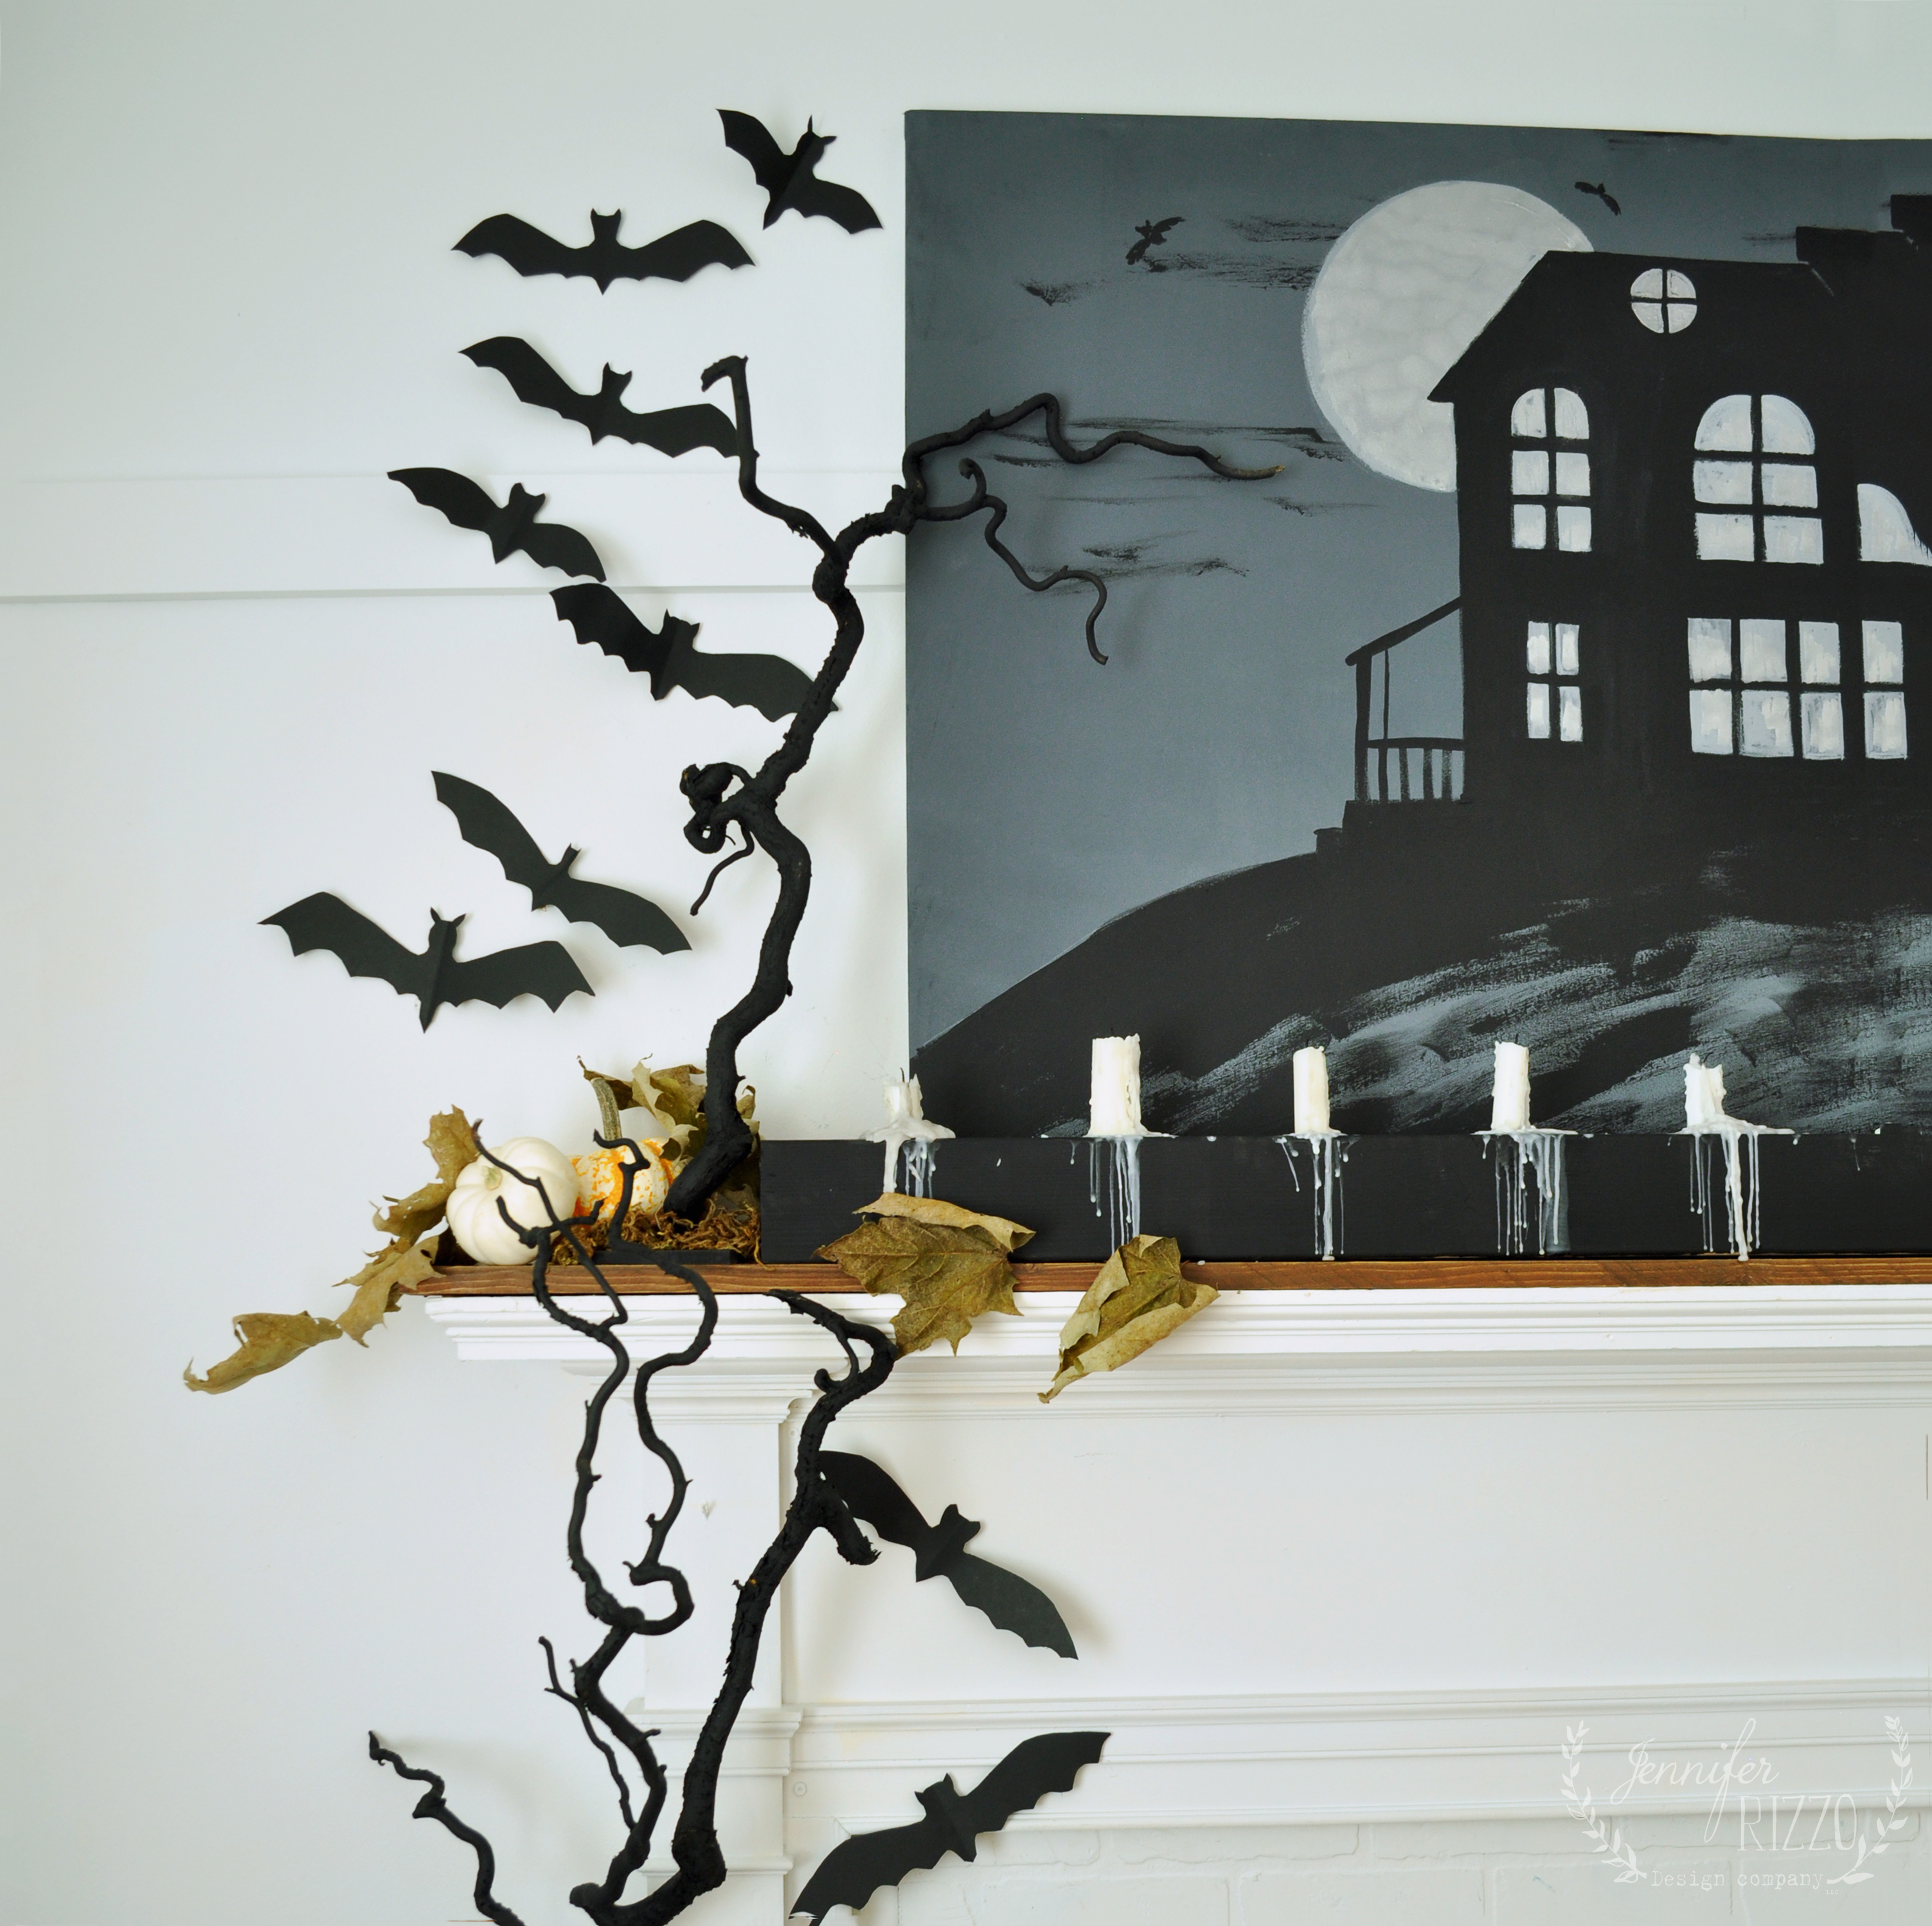 Learn how to paint Halloween decorations using a HomeRight paint sprayer. The sprayer makes it easy to paint twisty branches and fall pumpkins!